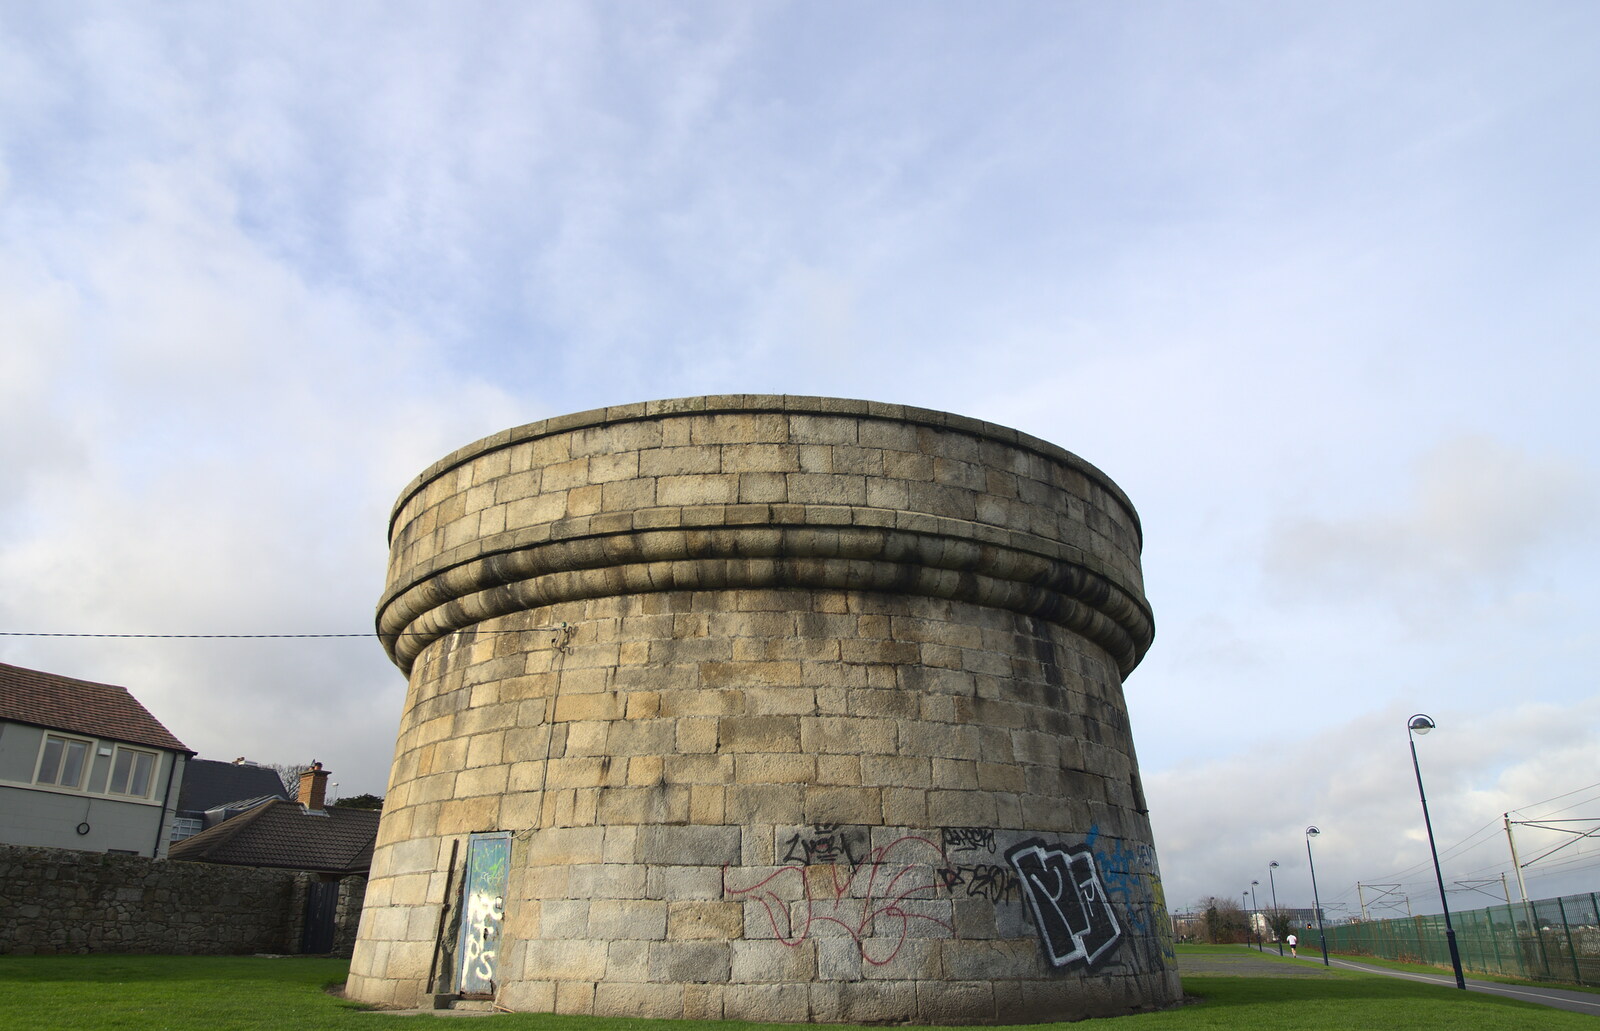 A Martello tower from A Morning in Blackrock, County Dublin, Ireland - 8th January 2012